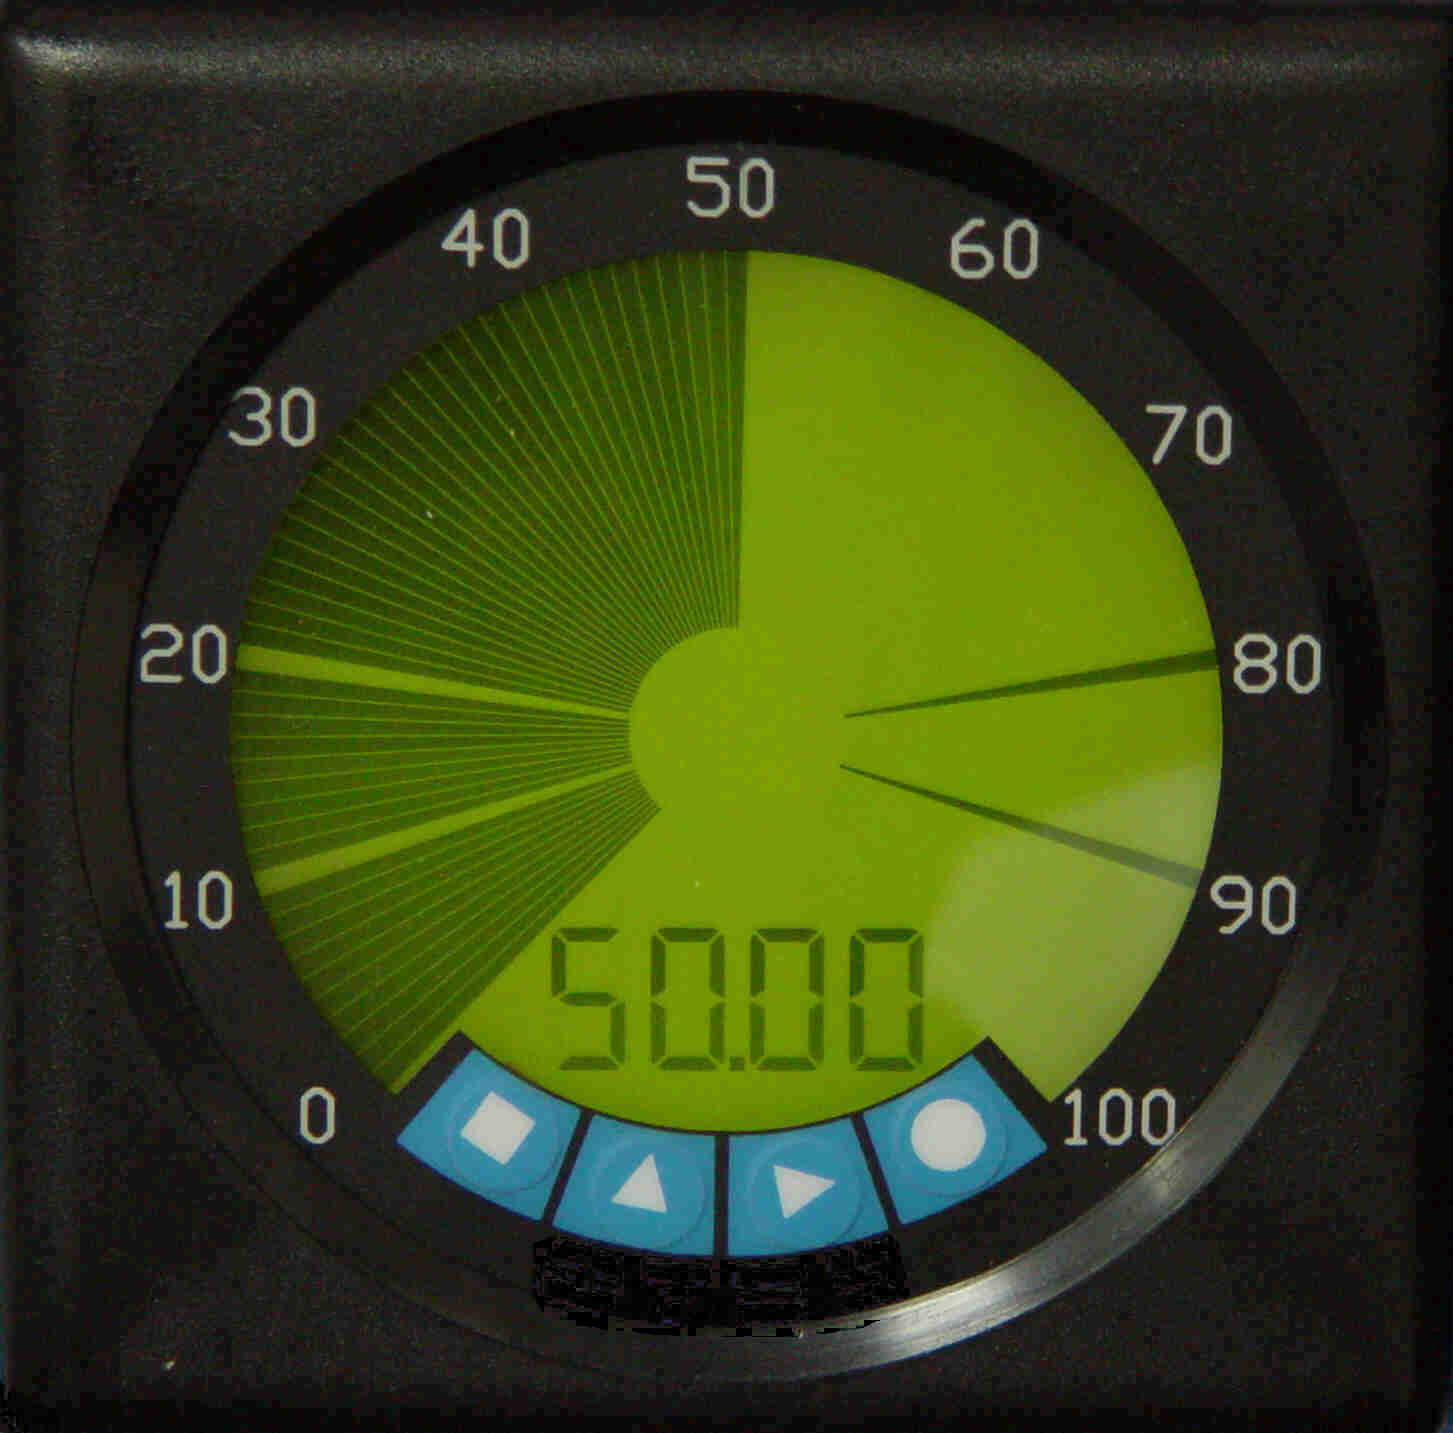 LCD replacement for DB40 analog meter